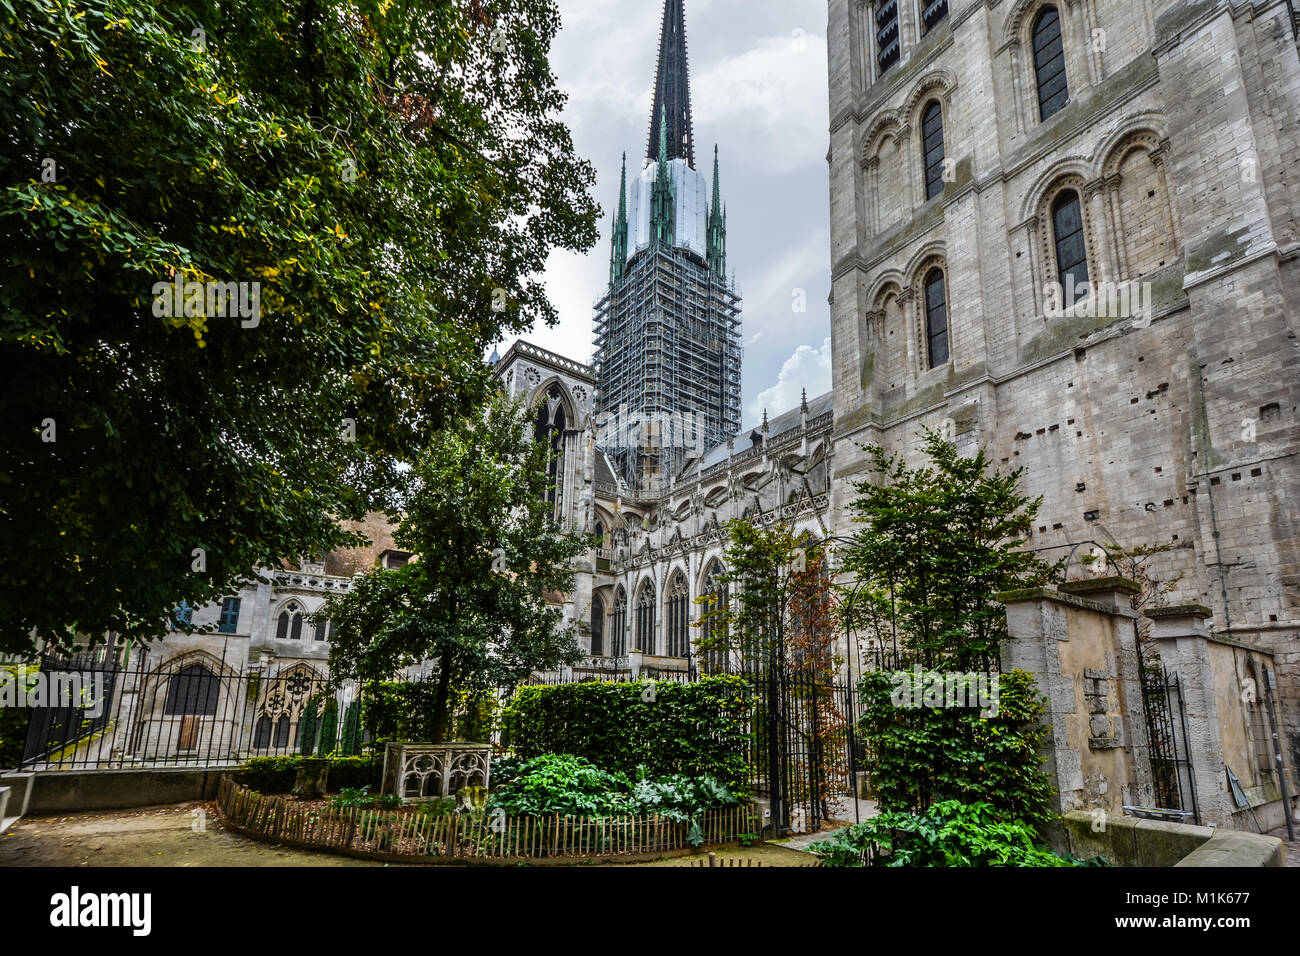 The garden and cloister of the medieval Notre Dame Cathedral of Rouen France in the Normandy region with scaffolding on the tower. Stock Photo